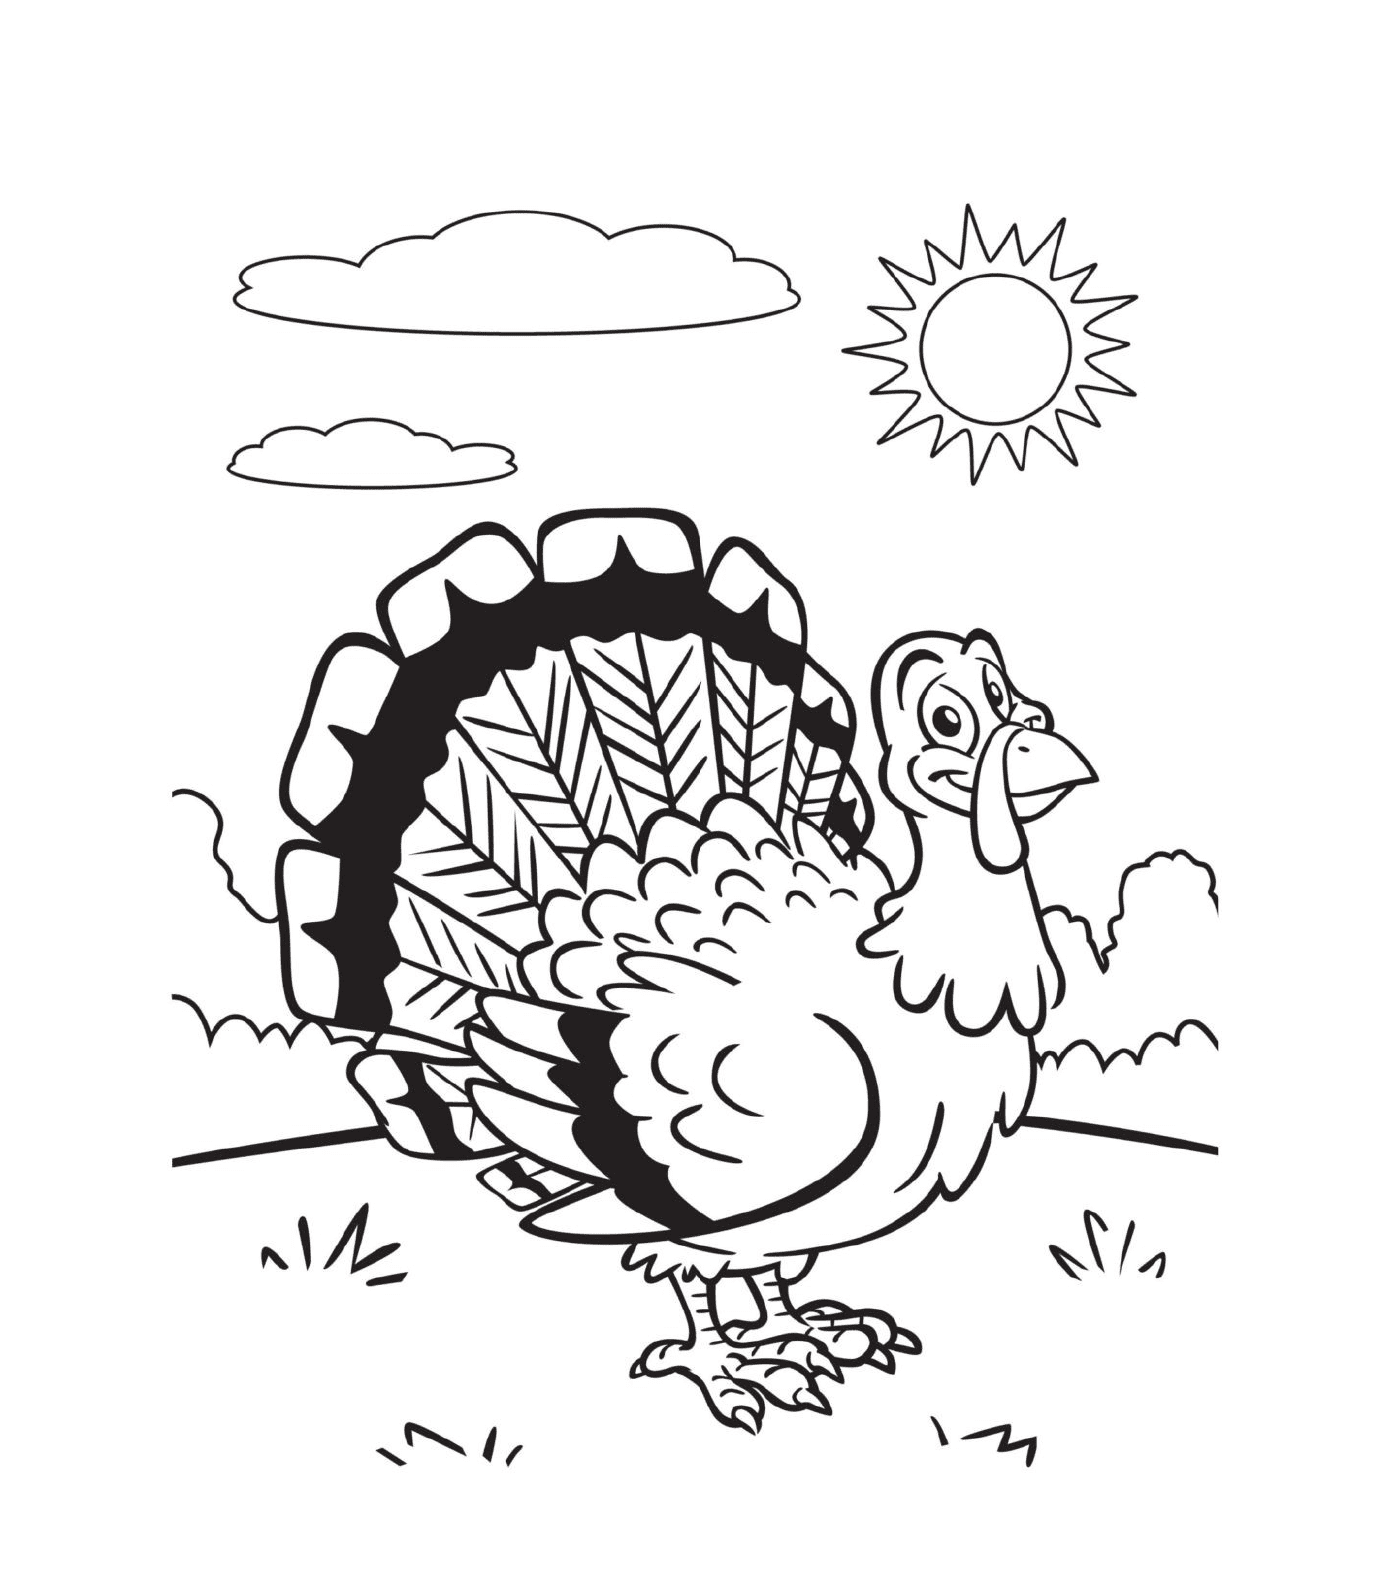  A turkey drawn in black and white 